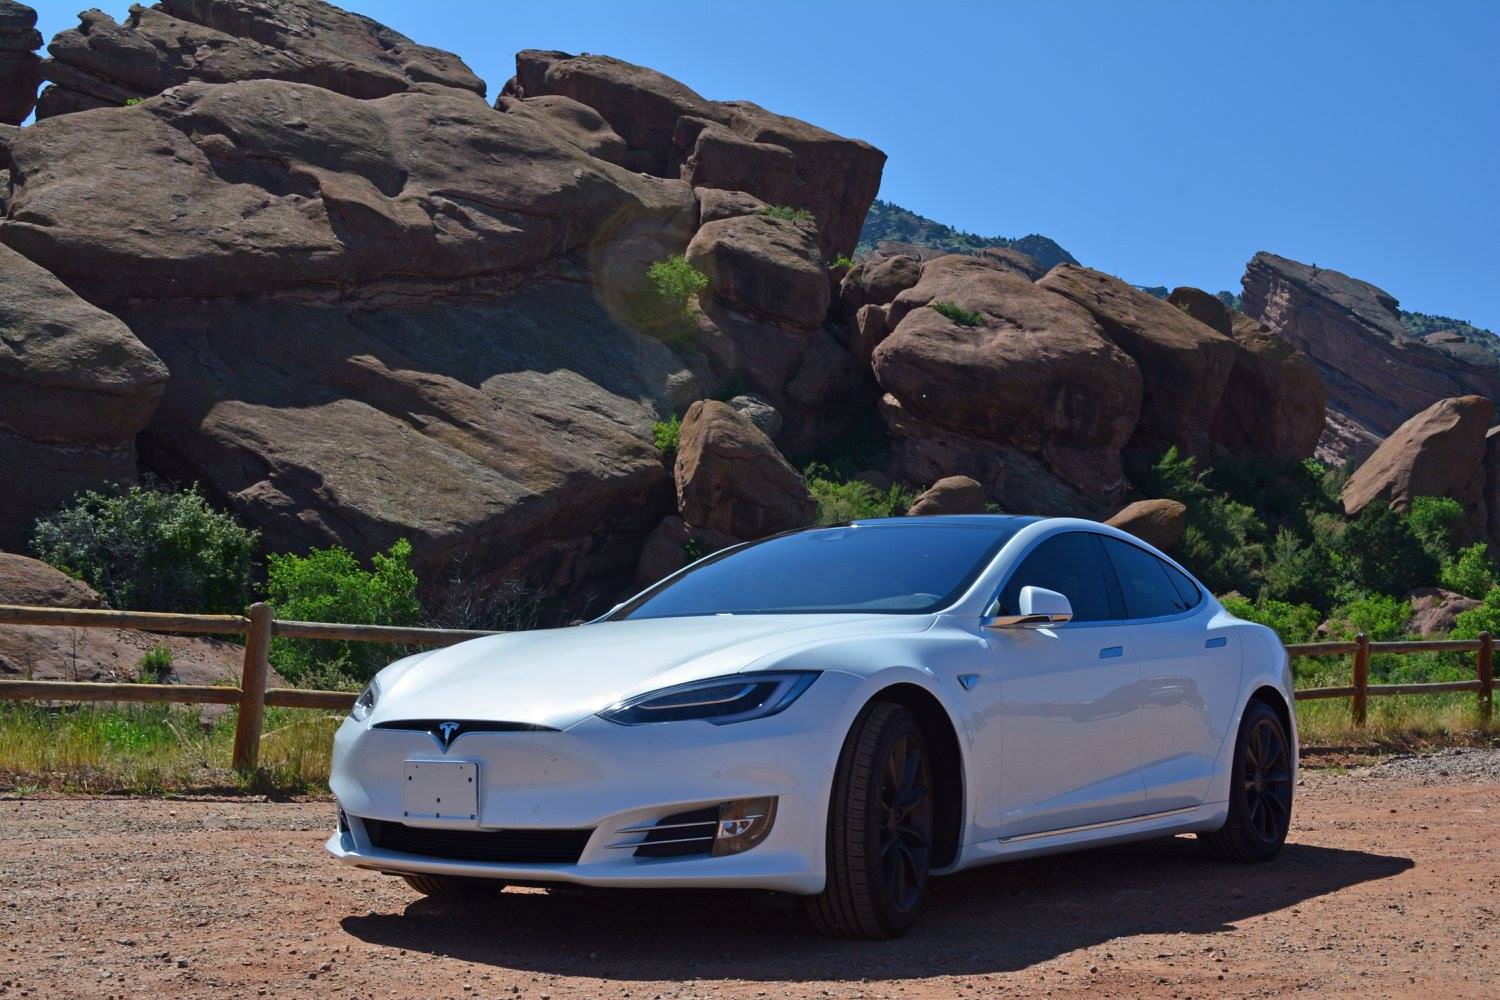 Refreshed Pearl White 90D Photos | Tesla Motors Club